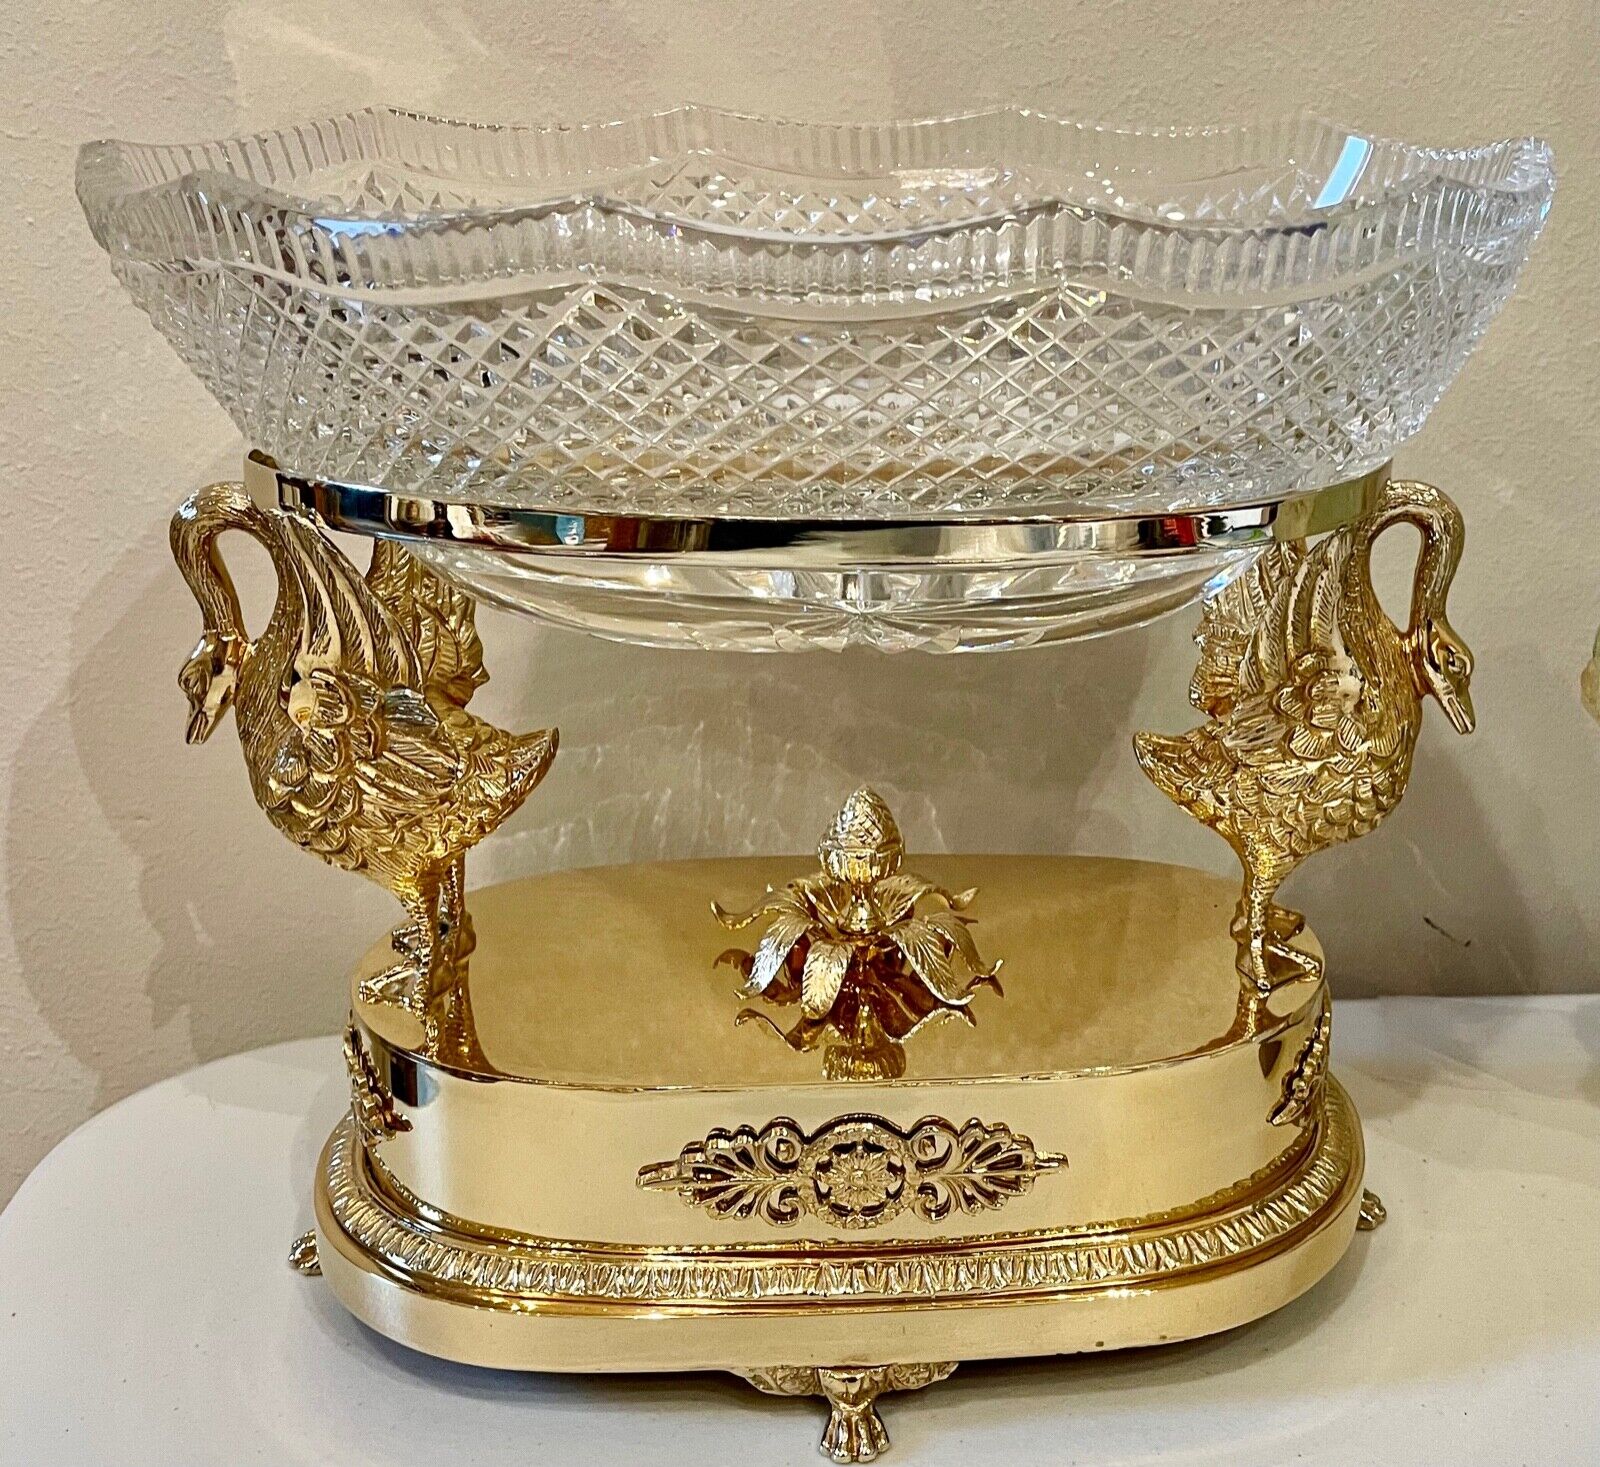 massive French Gilt Bronze & Cut Crystal Centerpiece Bowl Early 20th century